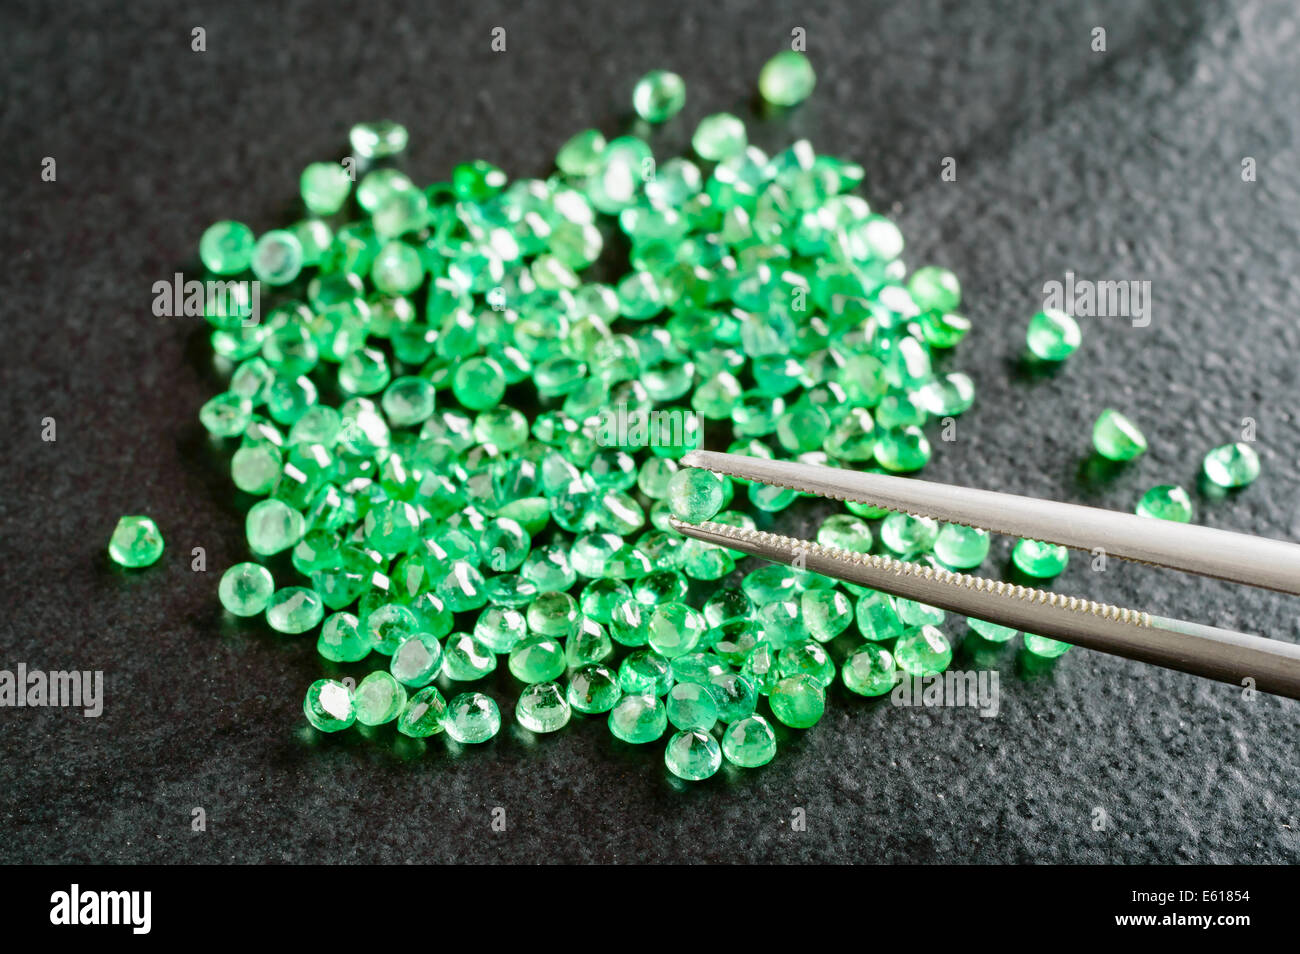 Pile of green, round cut emeralds on black stone plate. One emerald held by tweezers. Stock Photo